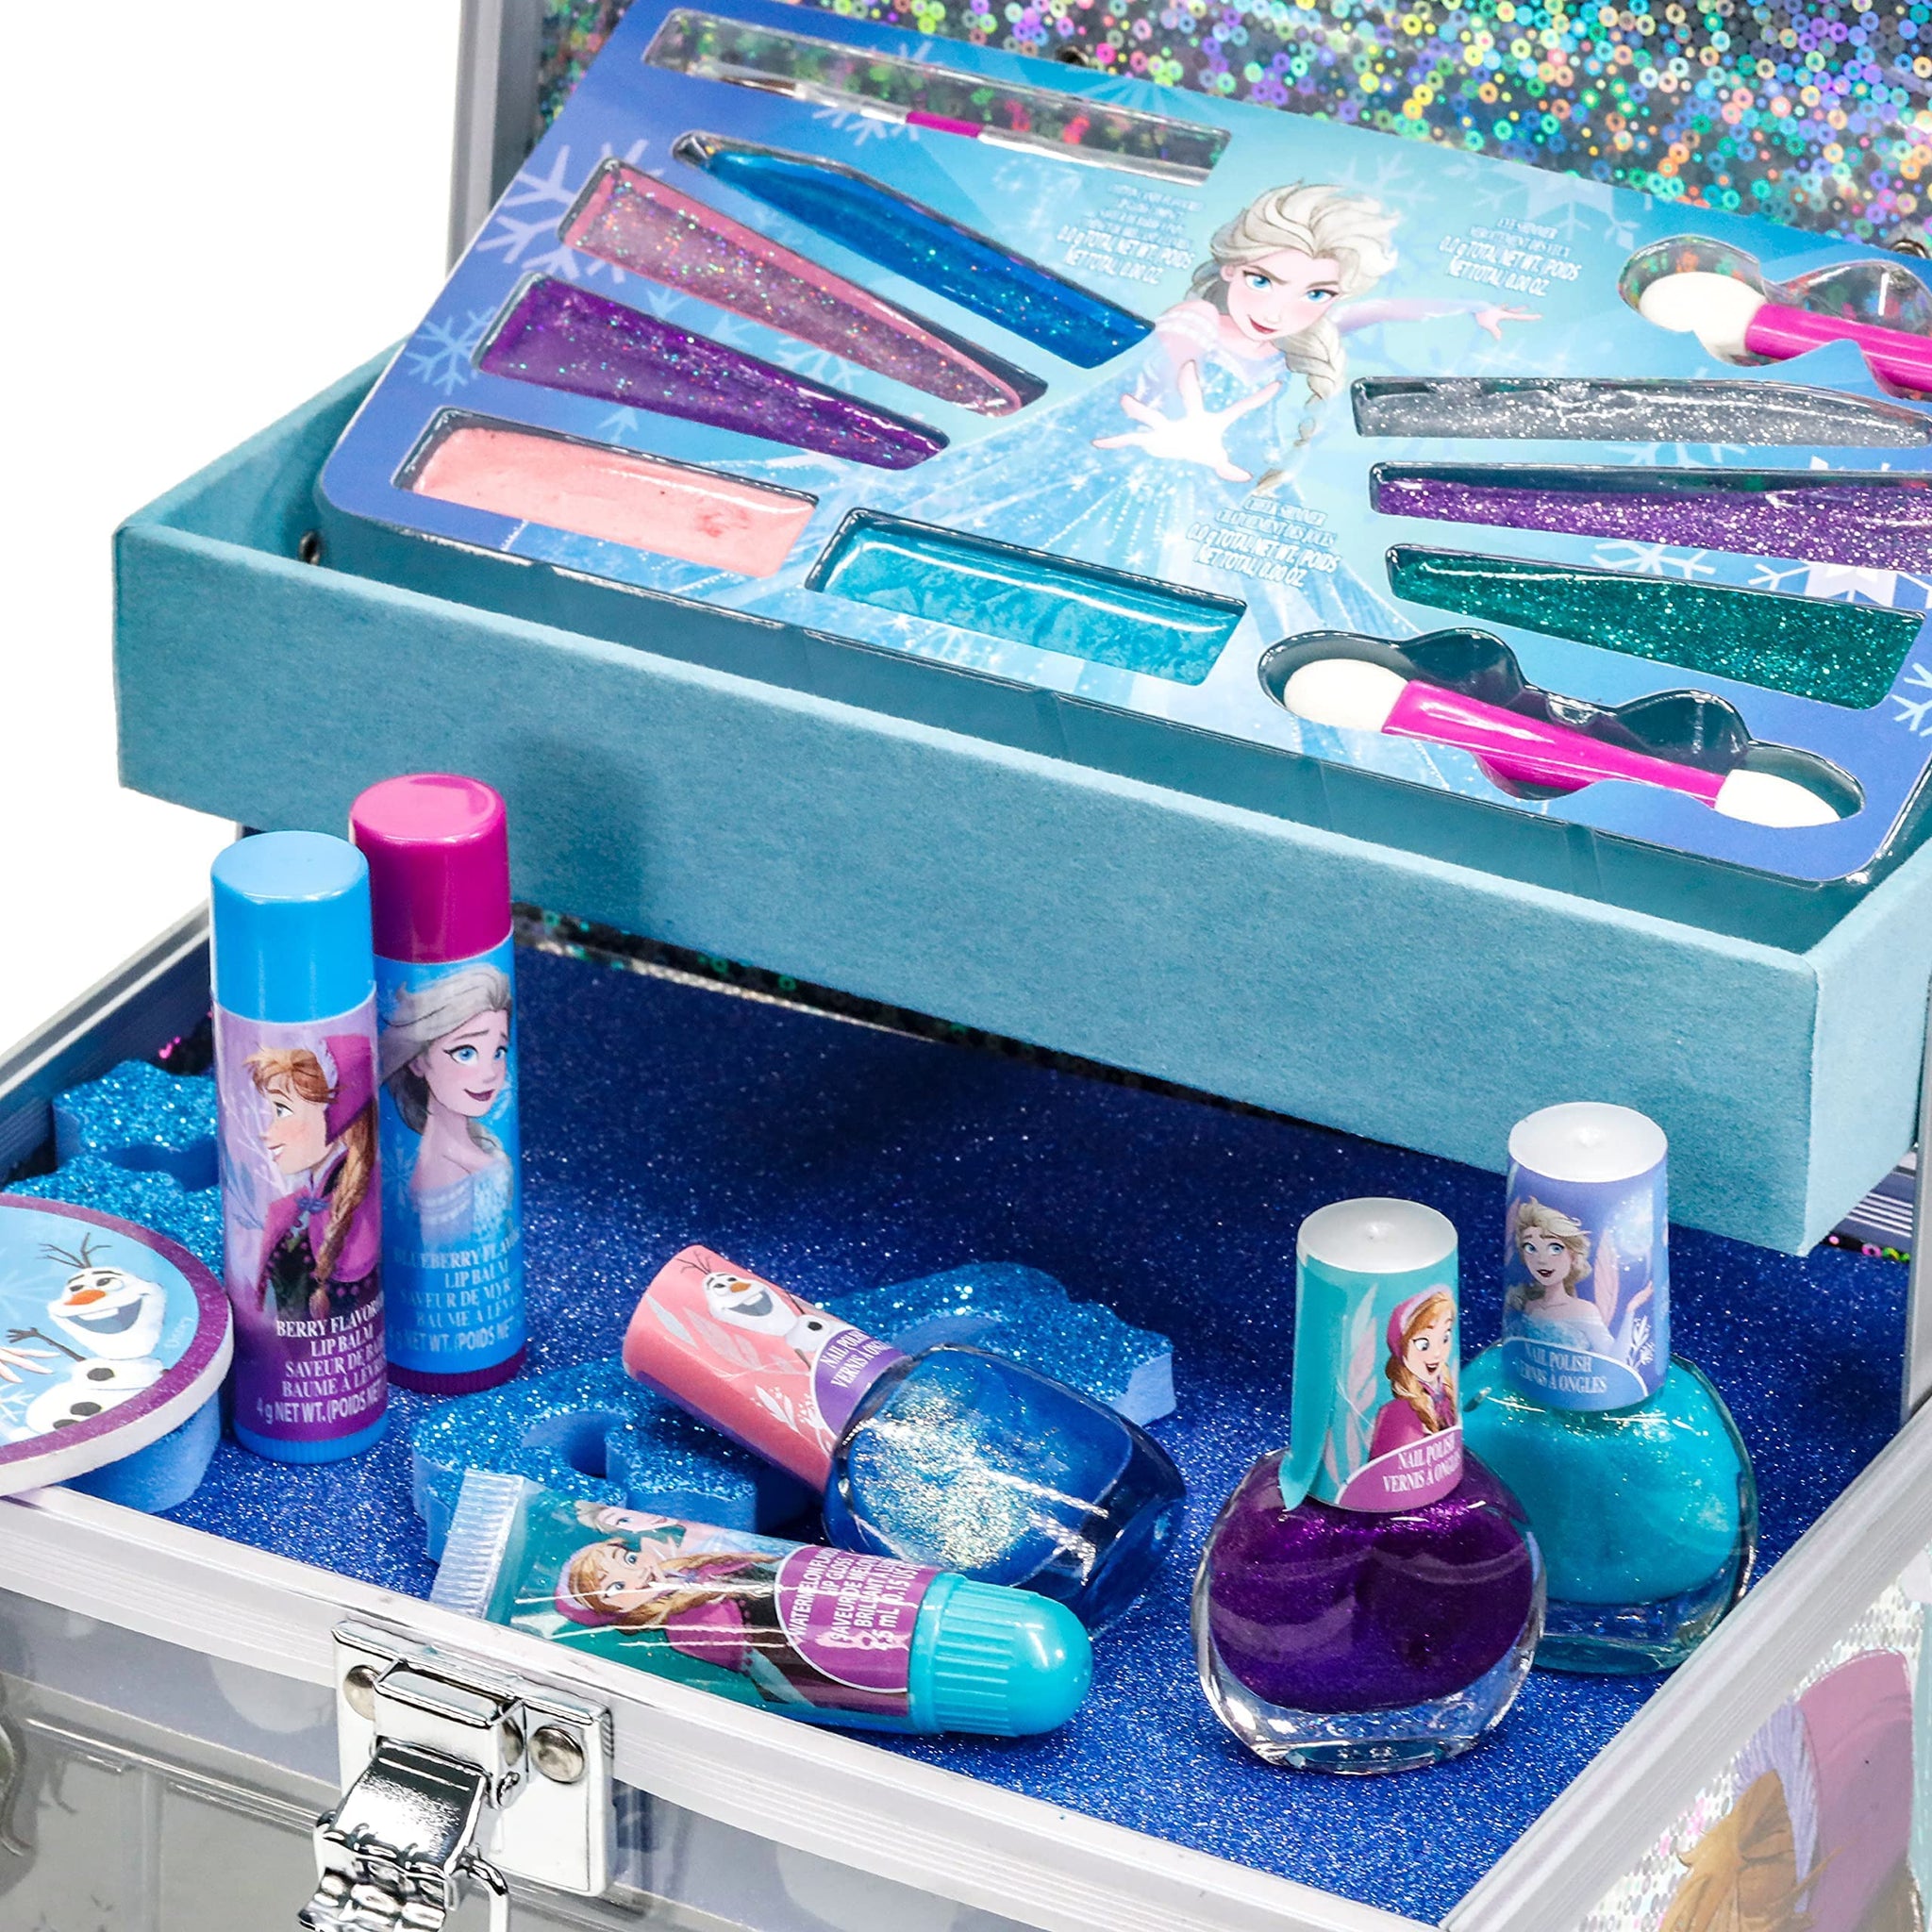 L.O.L Surprise! Townley Girl Kids' Makeup Set With Train Case for Ages 3+ 